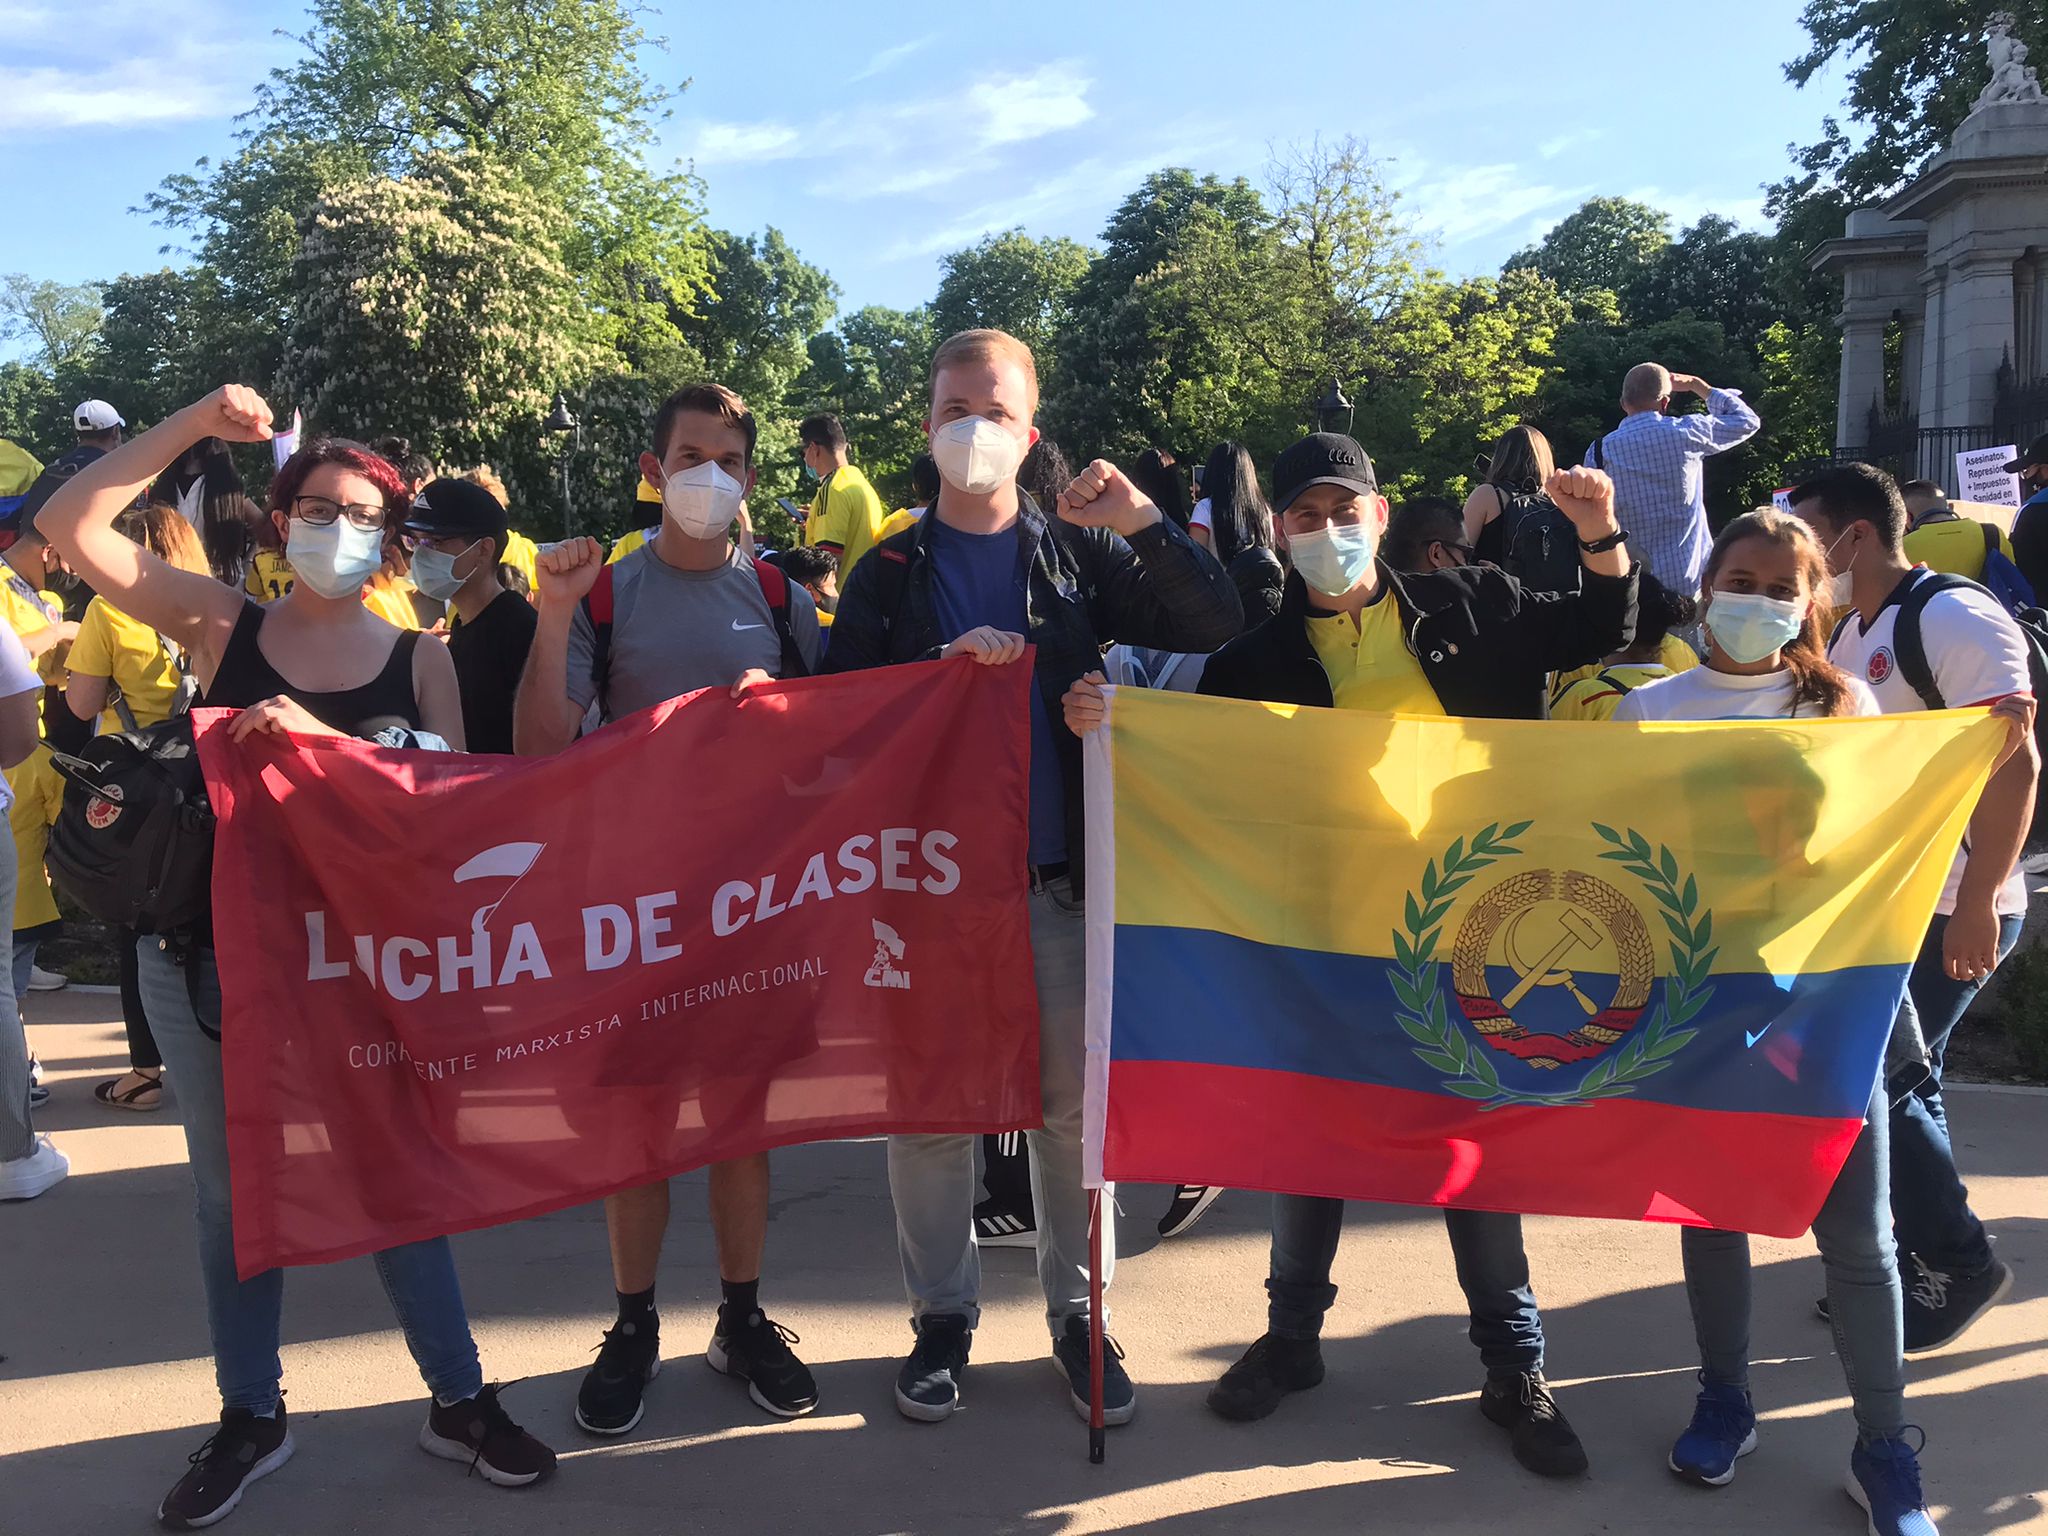 Madrid Colombia protests 2